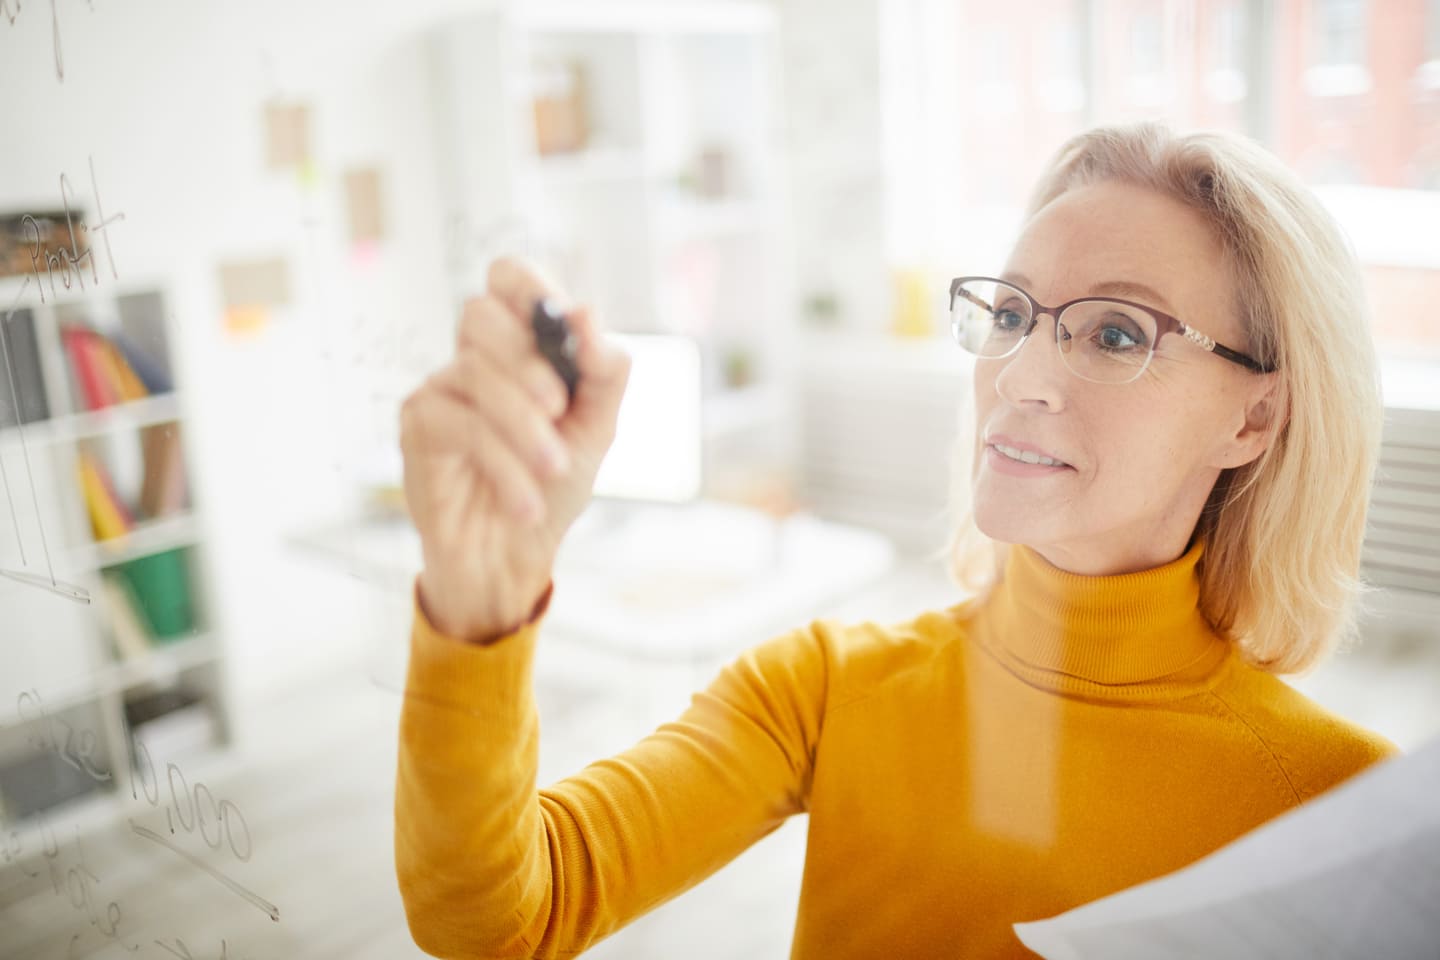 Businesswoman in her 50s writing on glass, with an orange turtleneck